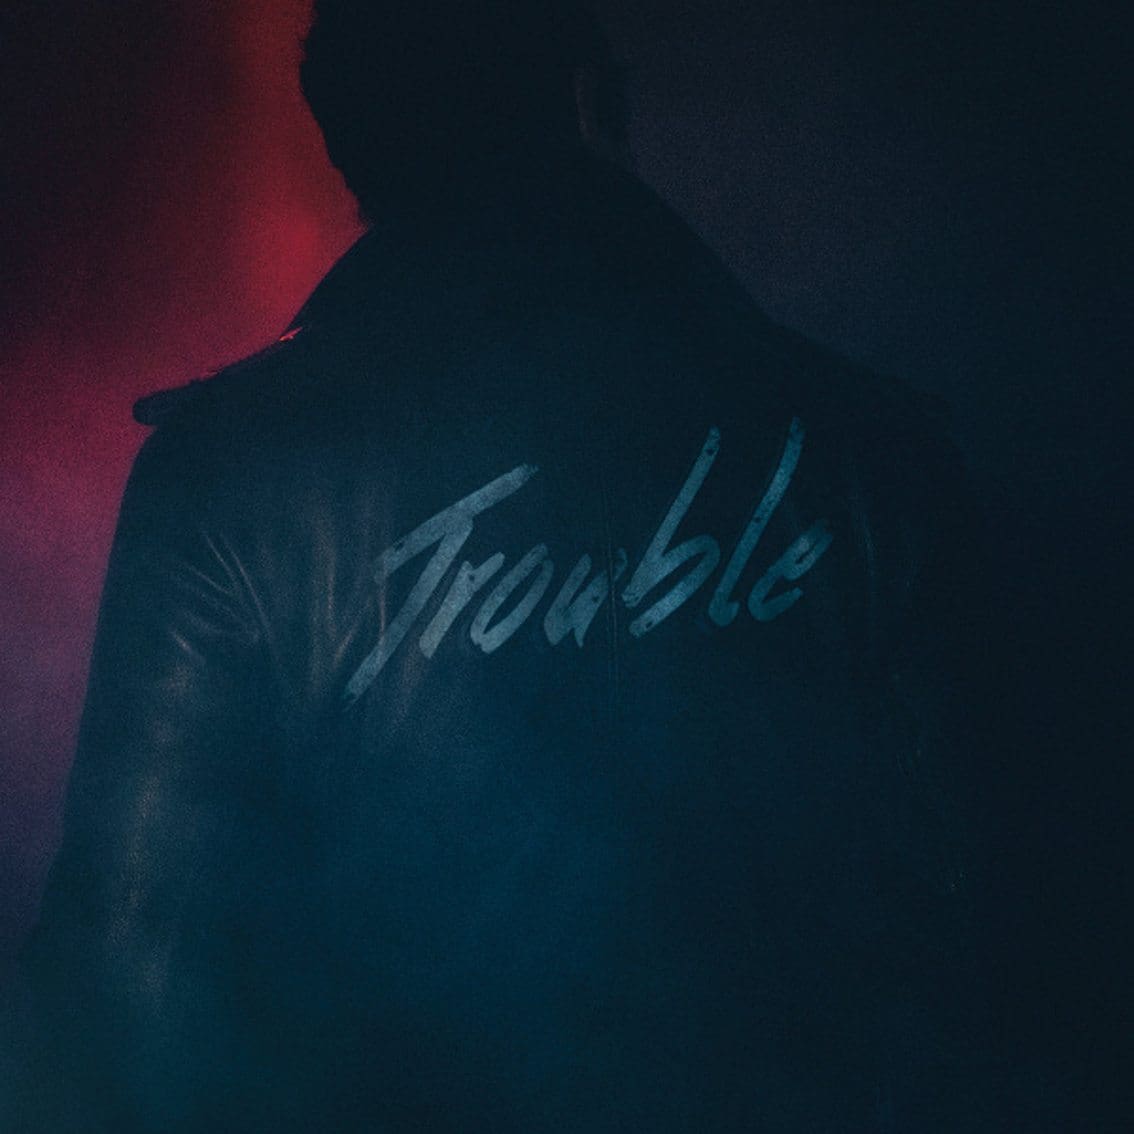 Twin Peaks tailored Trouble 2-track single 'Snake Eyes' issued as 7 inch vinyl